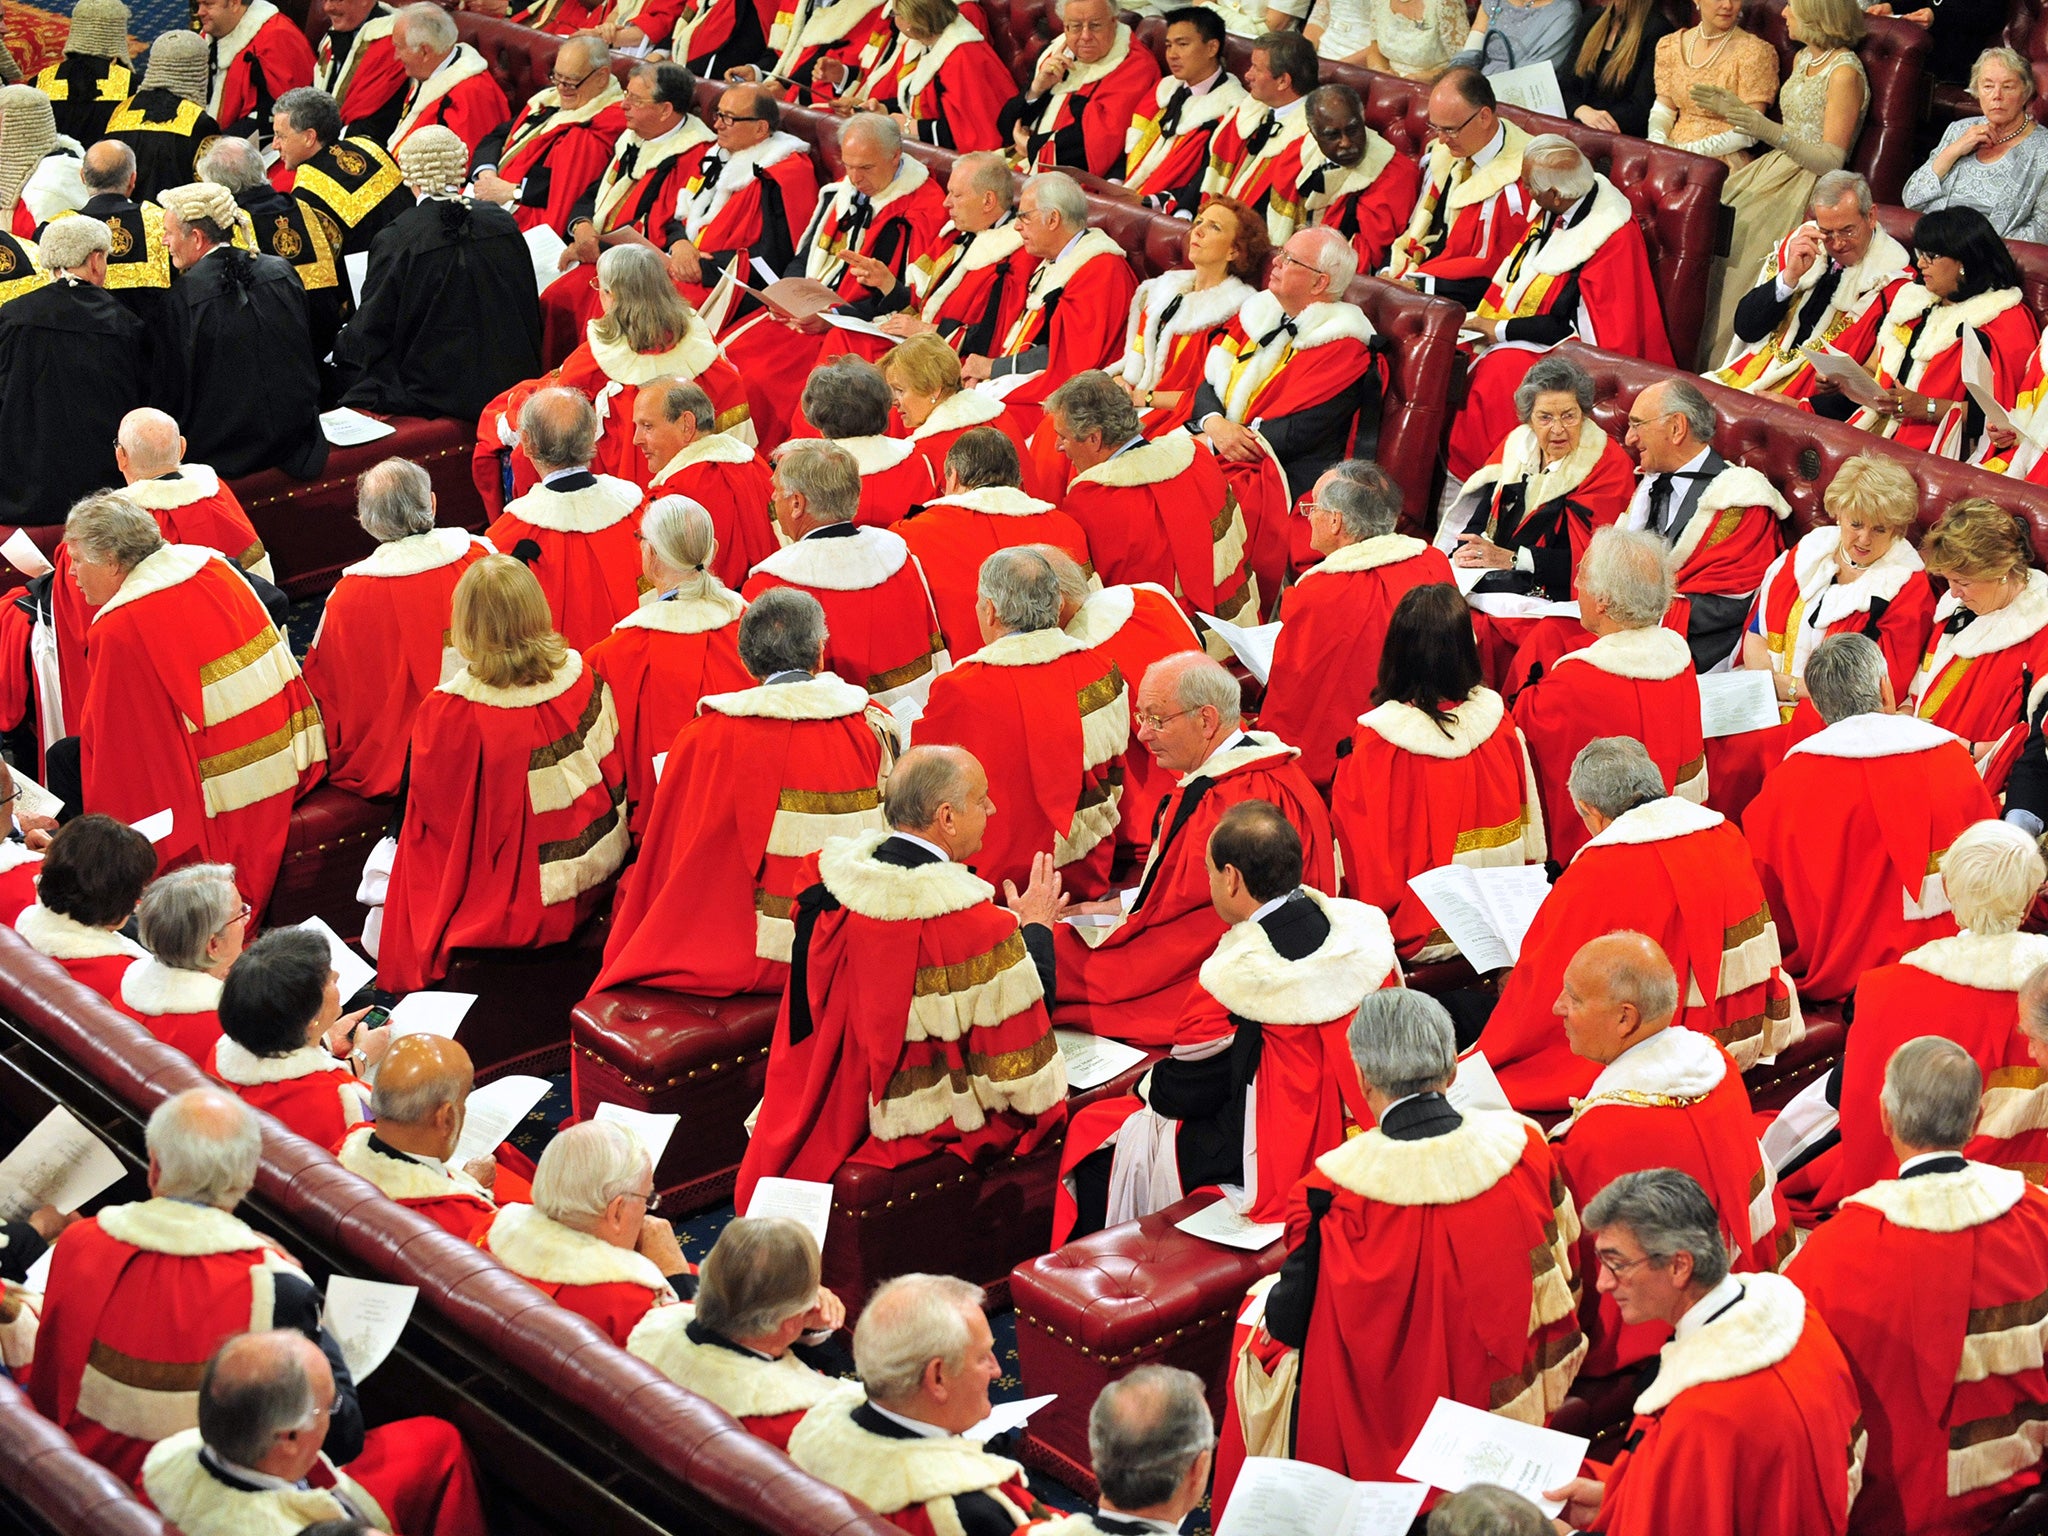 There are 92 hereditary peers still in the House of Lords following New Labour's reforms